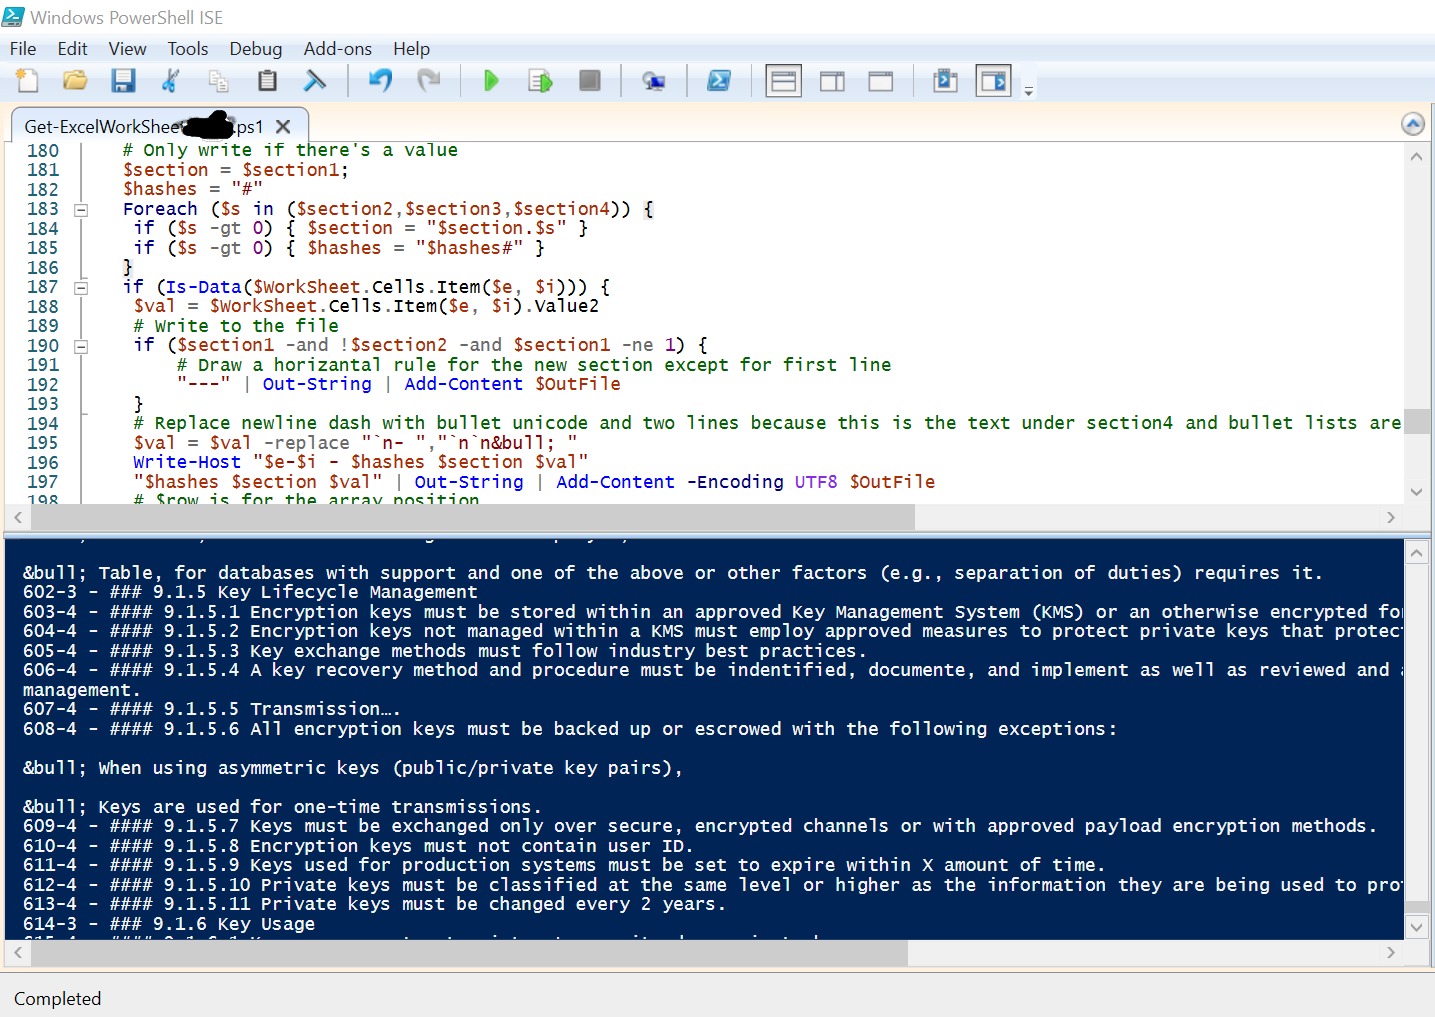 snippet of powershell being used